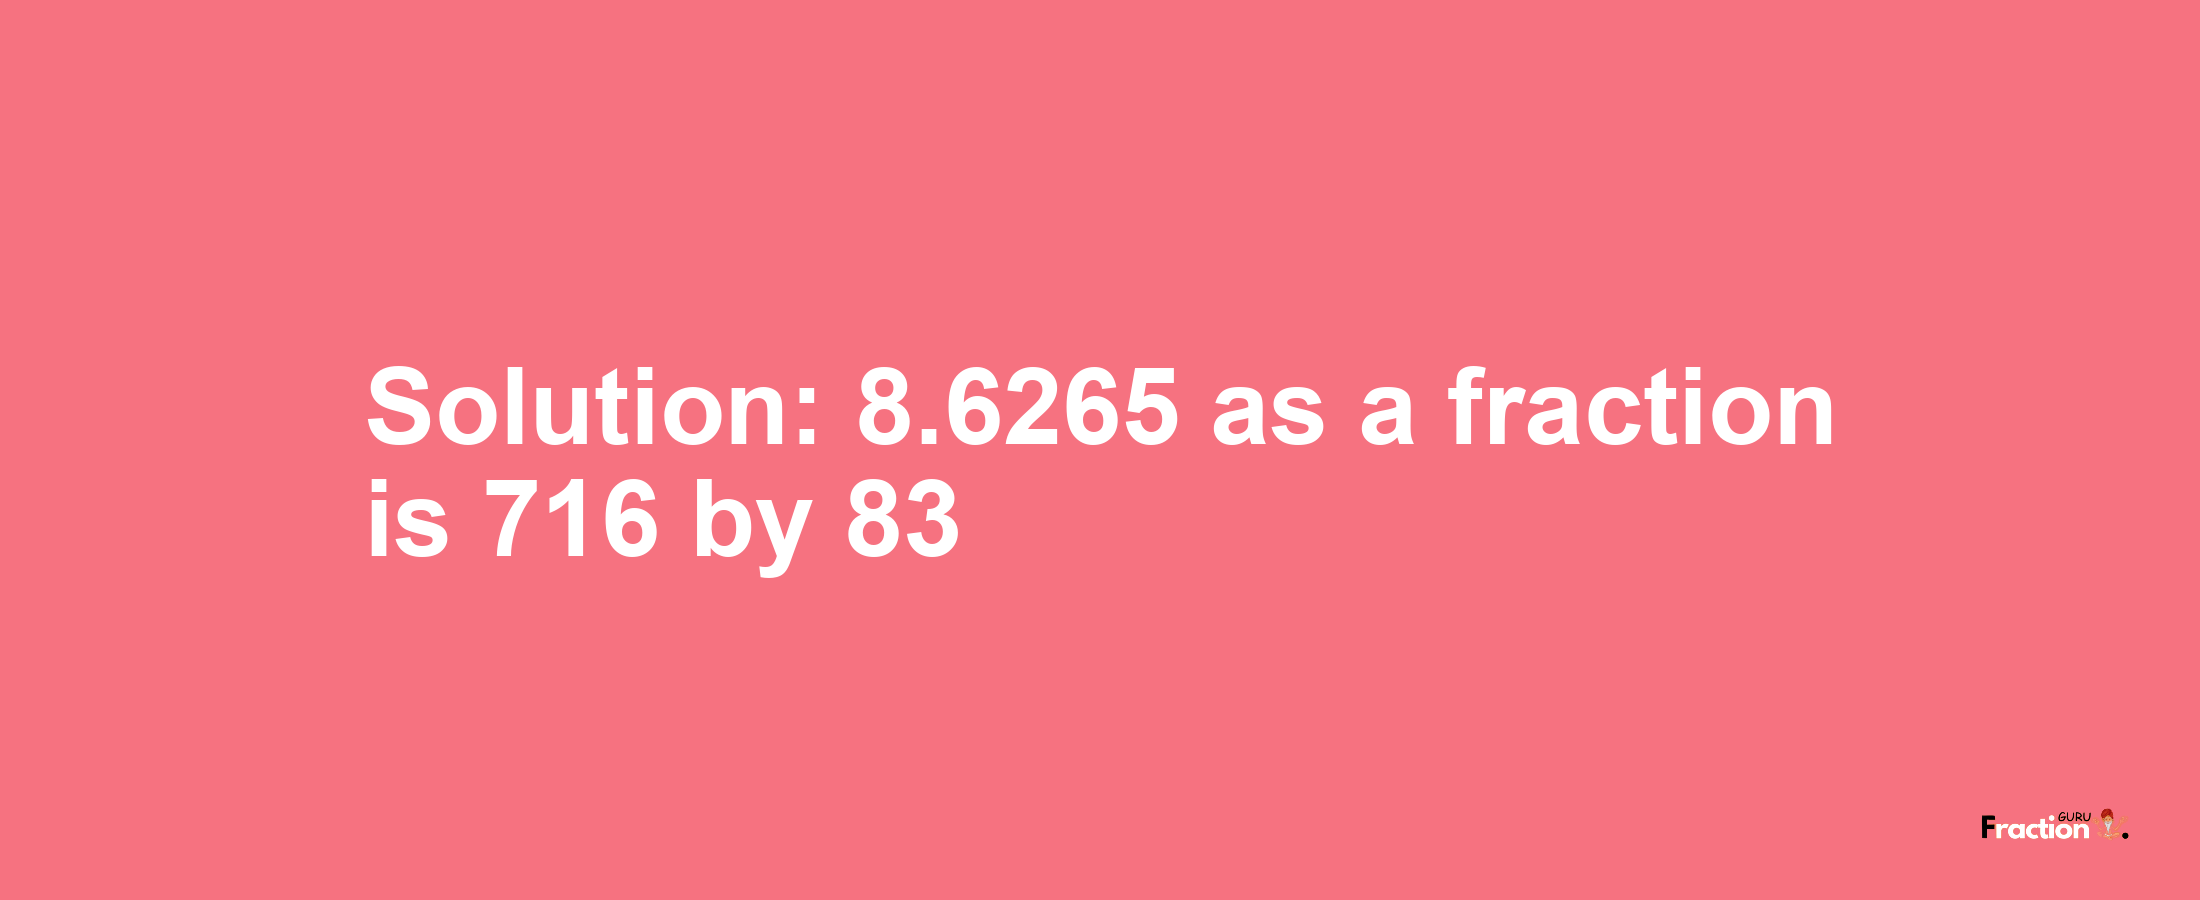 Solution:8.6265 as a fraction is 716/83